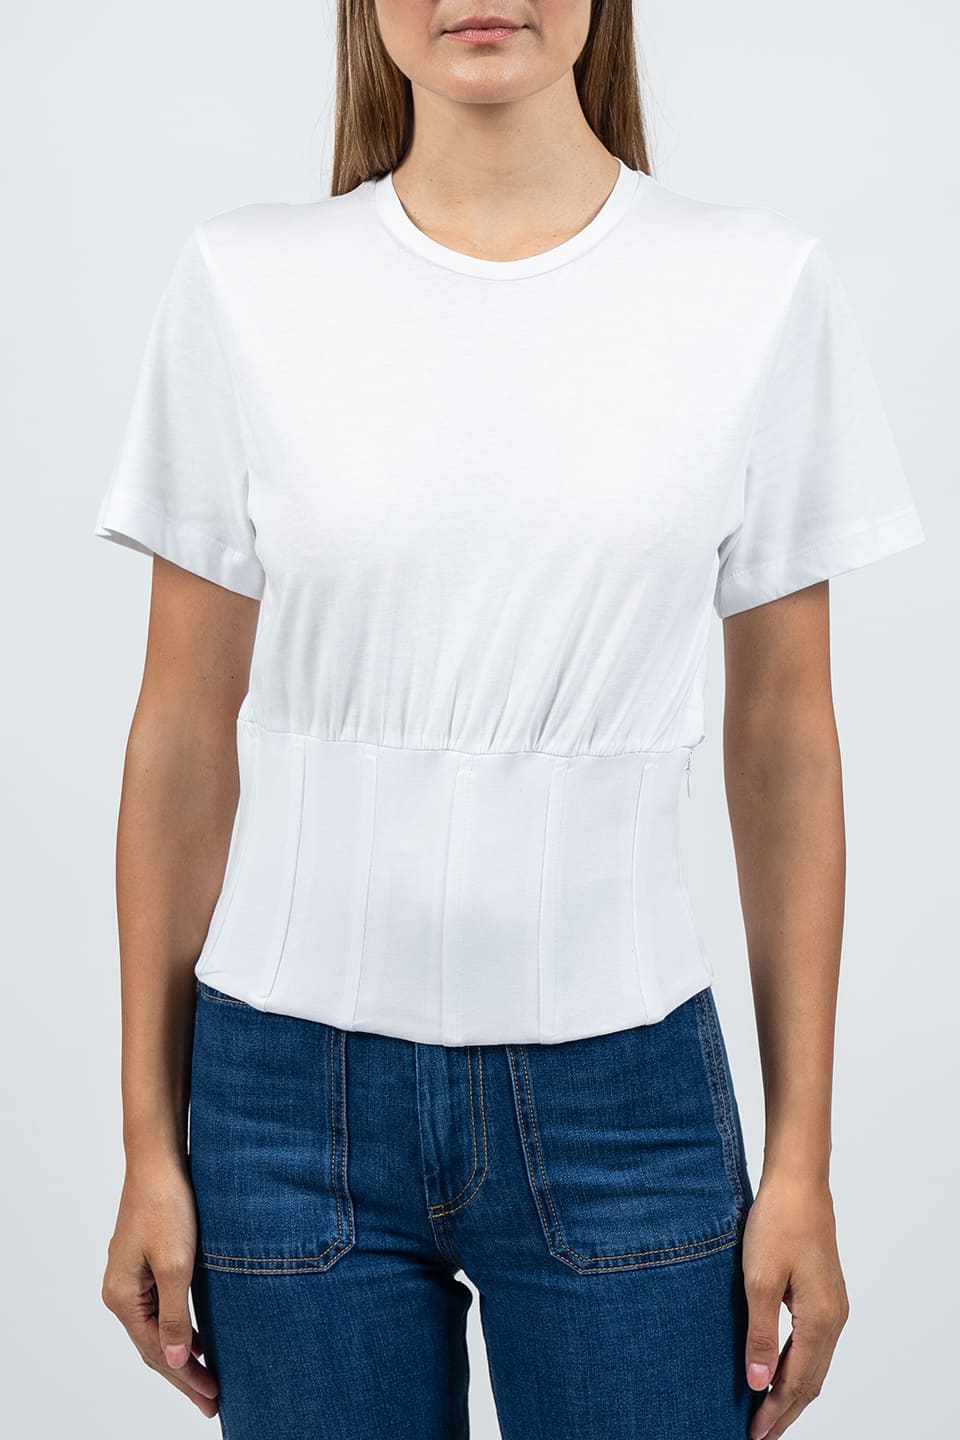 Shop online trendy White T-shirt from Federica Tosi Fashion designer. Product gallery 1